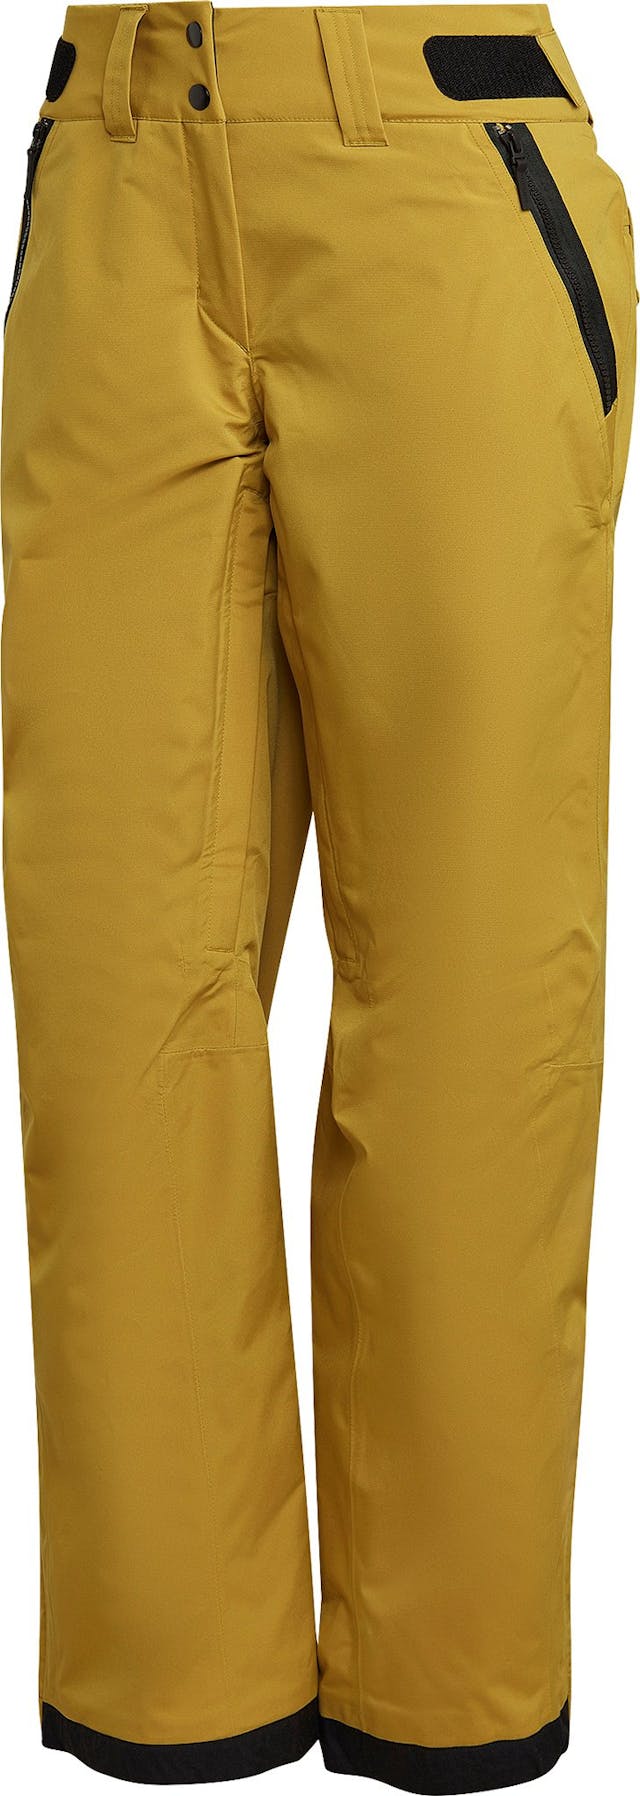 Product image for Resort Two-Layer Insulated Stretch Pants - Women's